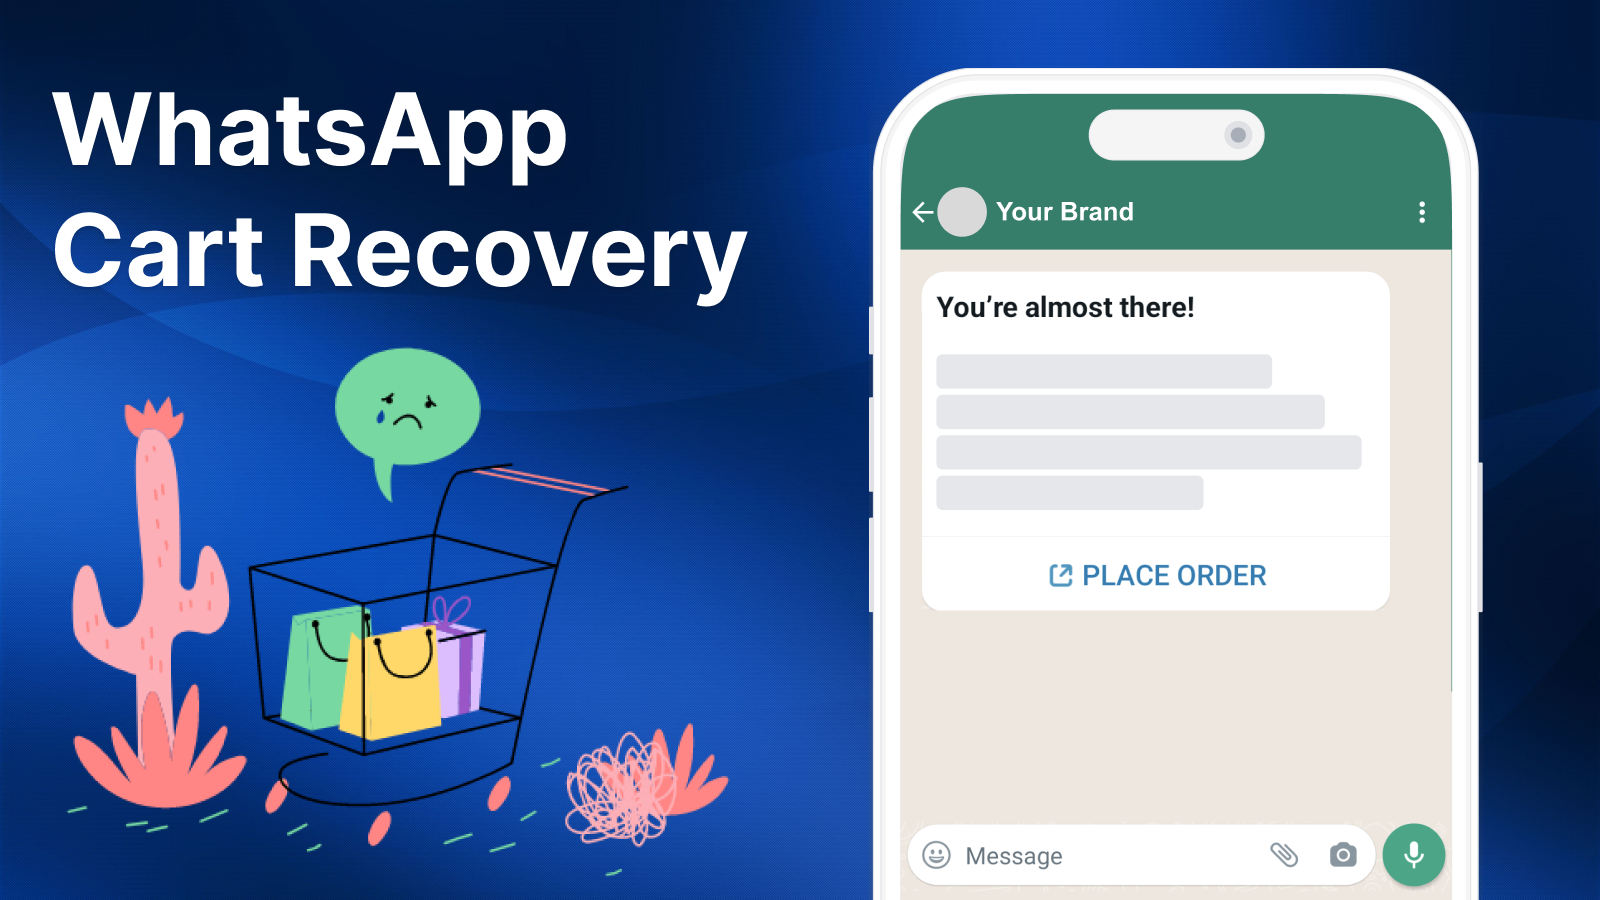 Recover More Carts With Automated WhatsApp Cart Recovery